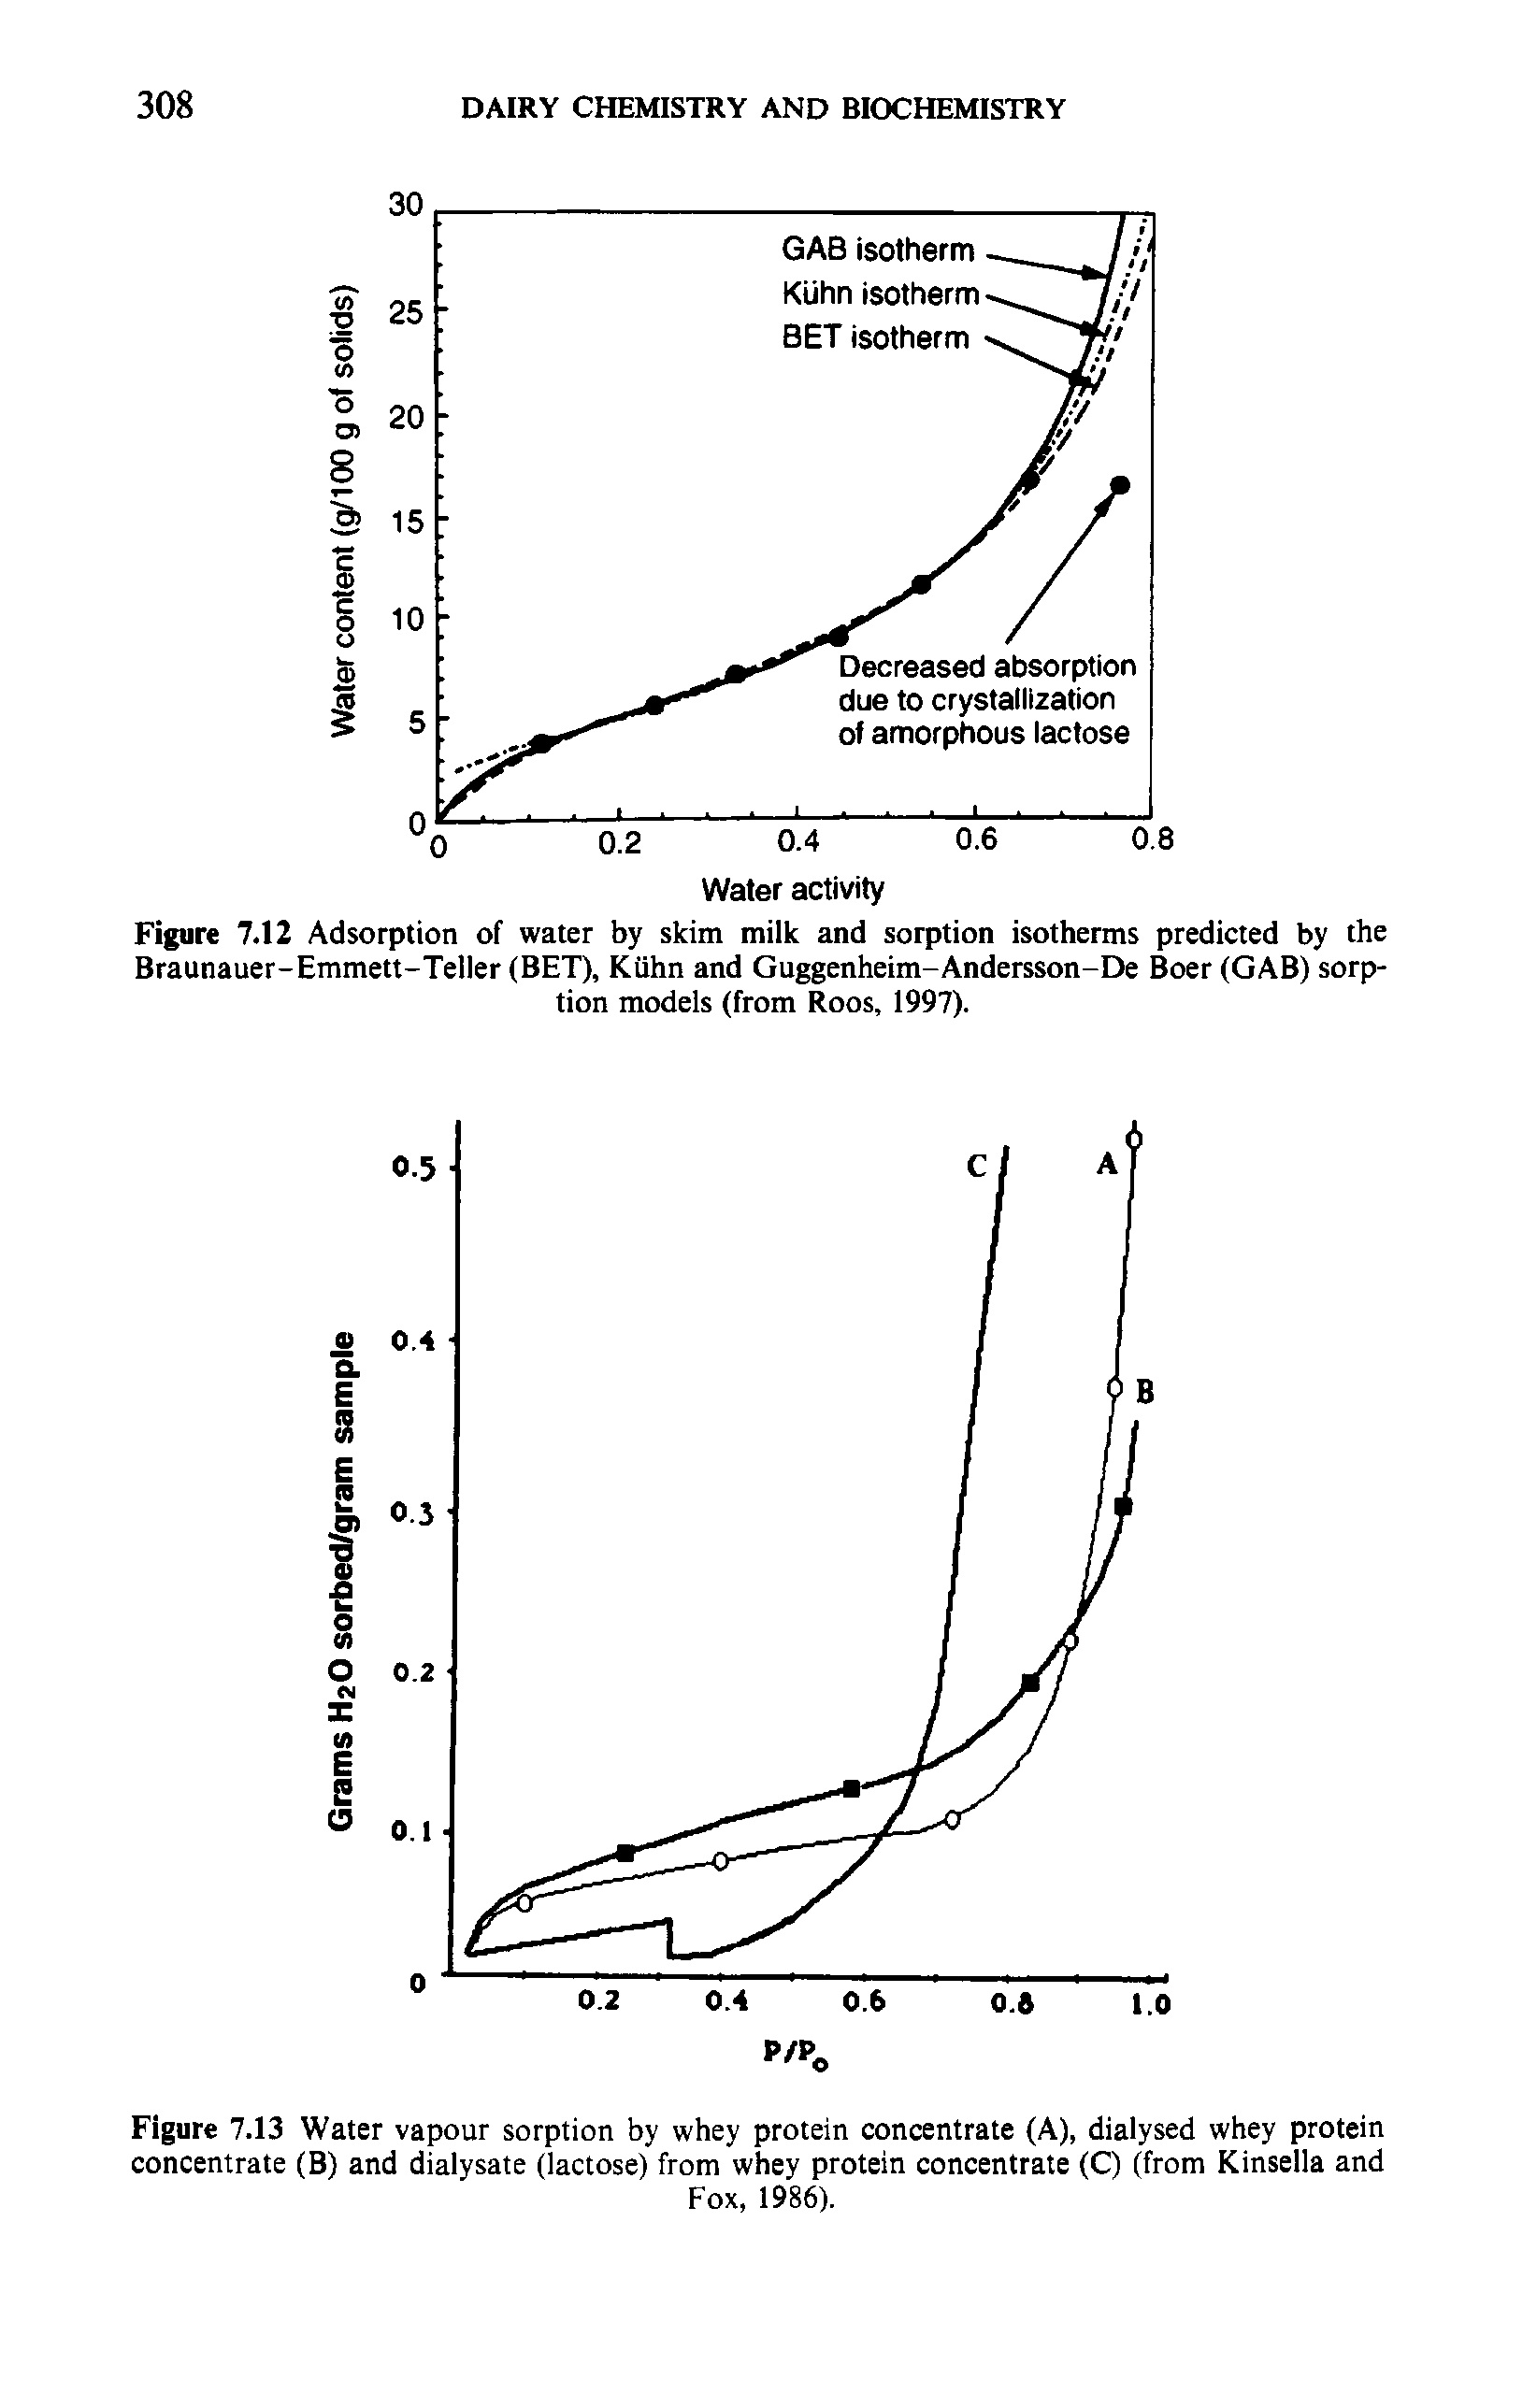 Figure 7.12 Adsorption of water by skim milk and sorption isotherms predicted by the Braunauer-Emmett-Teller (BET), Kuhn and Guggenheim-Andersson-De Boer (GAB) sorption models (from Roos, 1997).